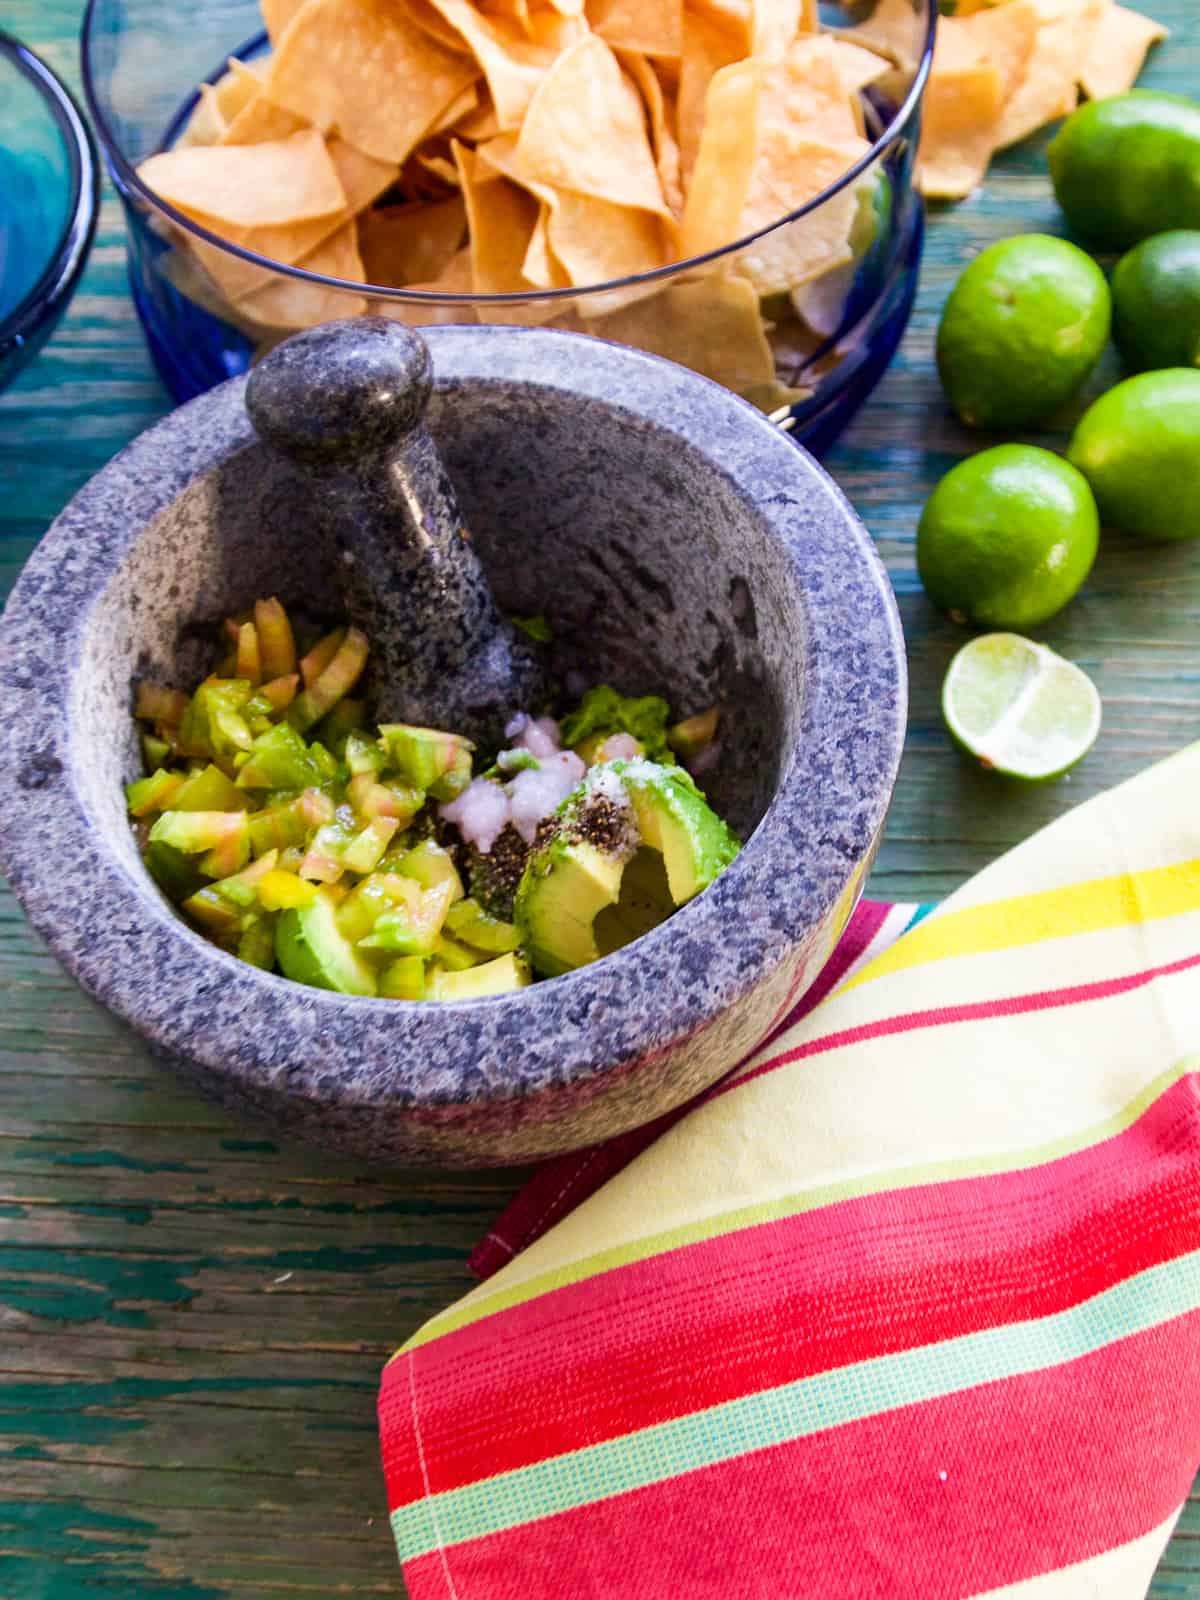 Making guacamole with ripe avocados, limes, spices, and lime juice in a stone mortar and pestle.